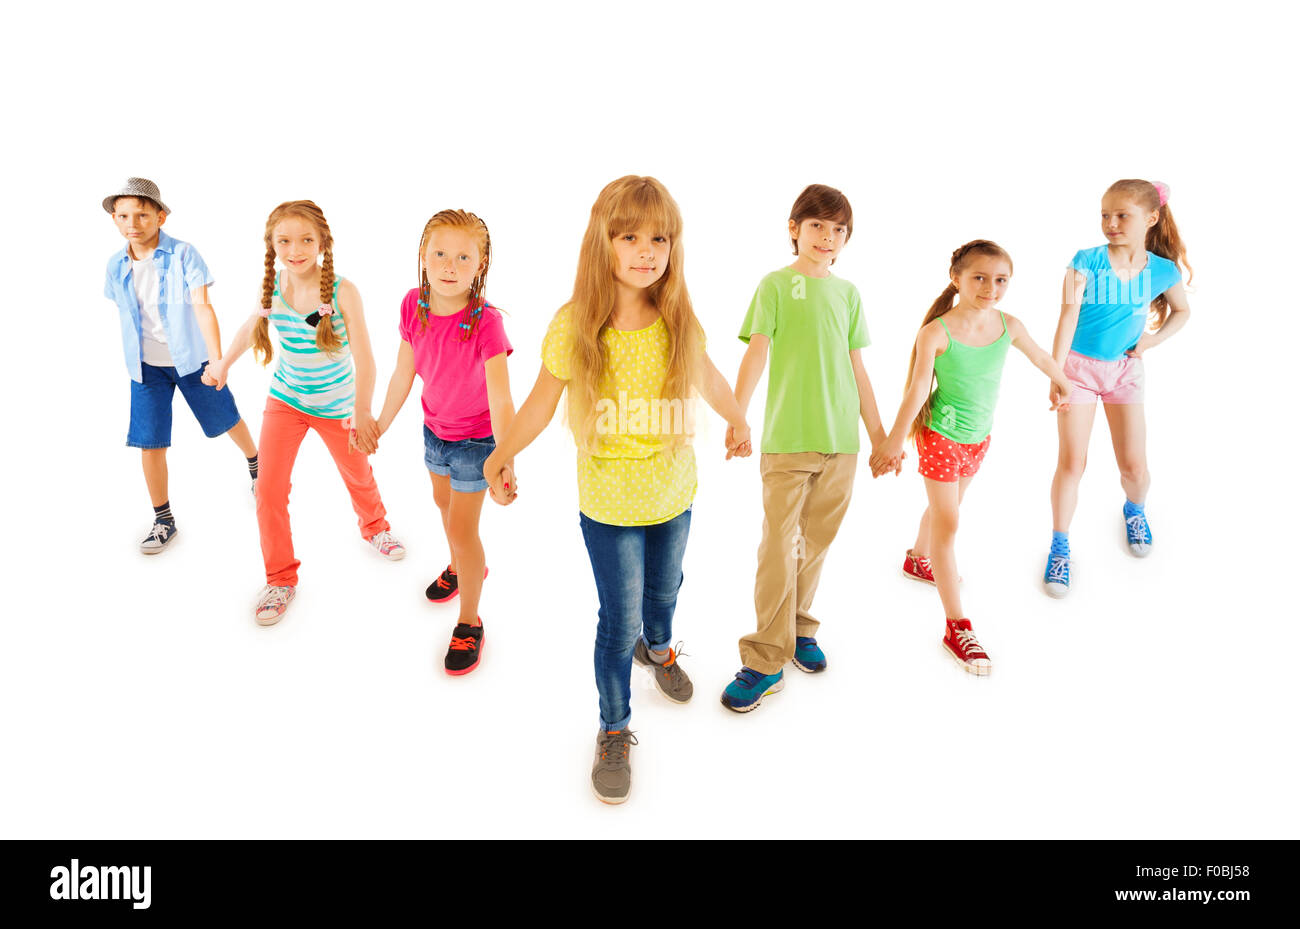 Many boys and girls stand together holding hands Stock Photo